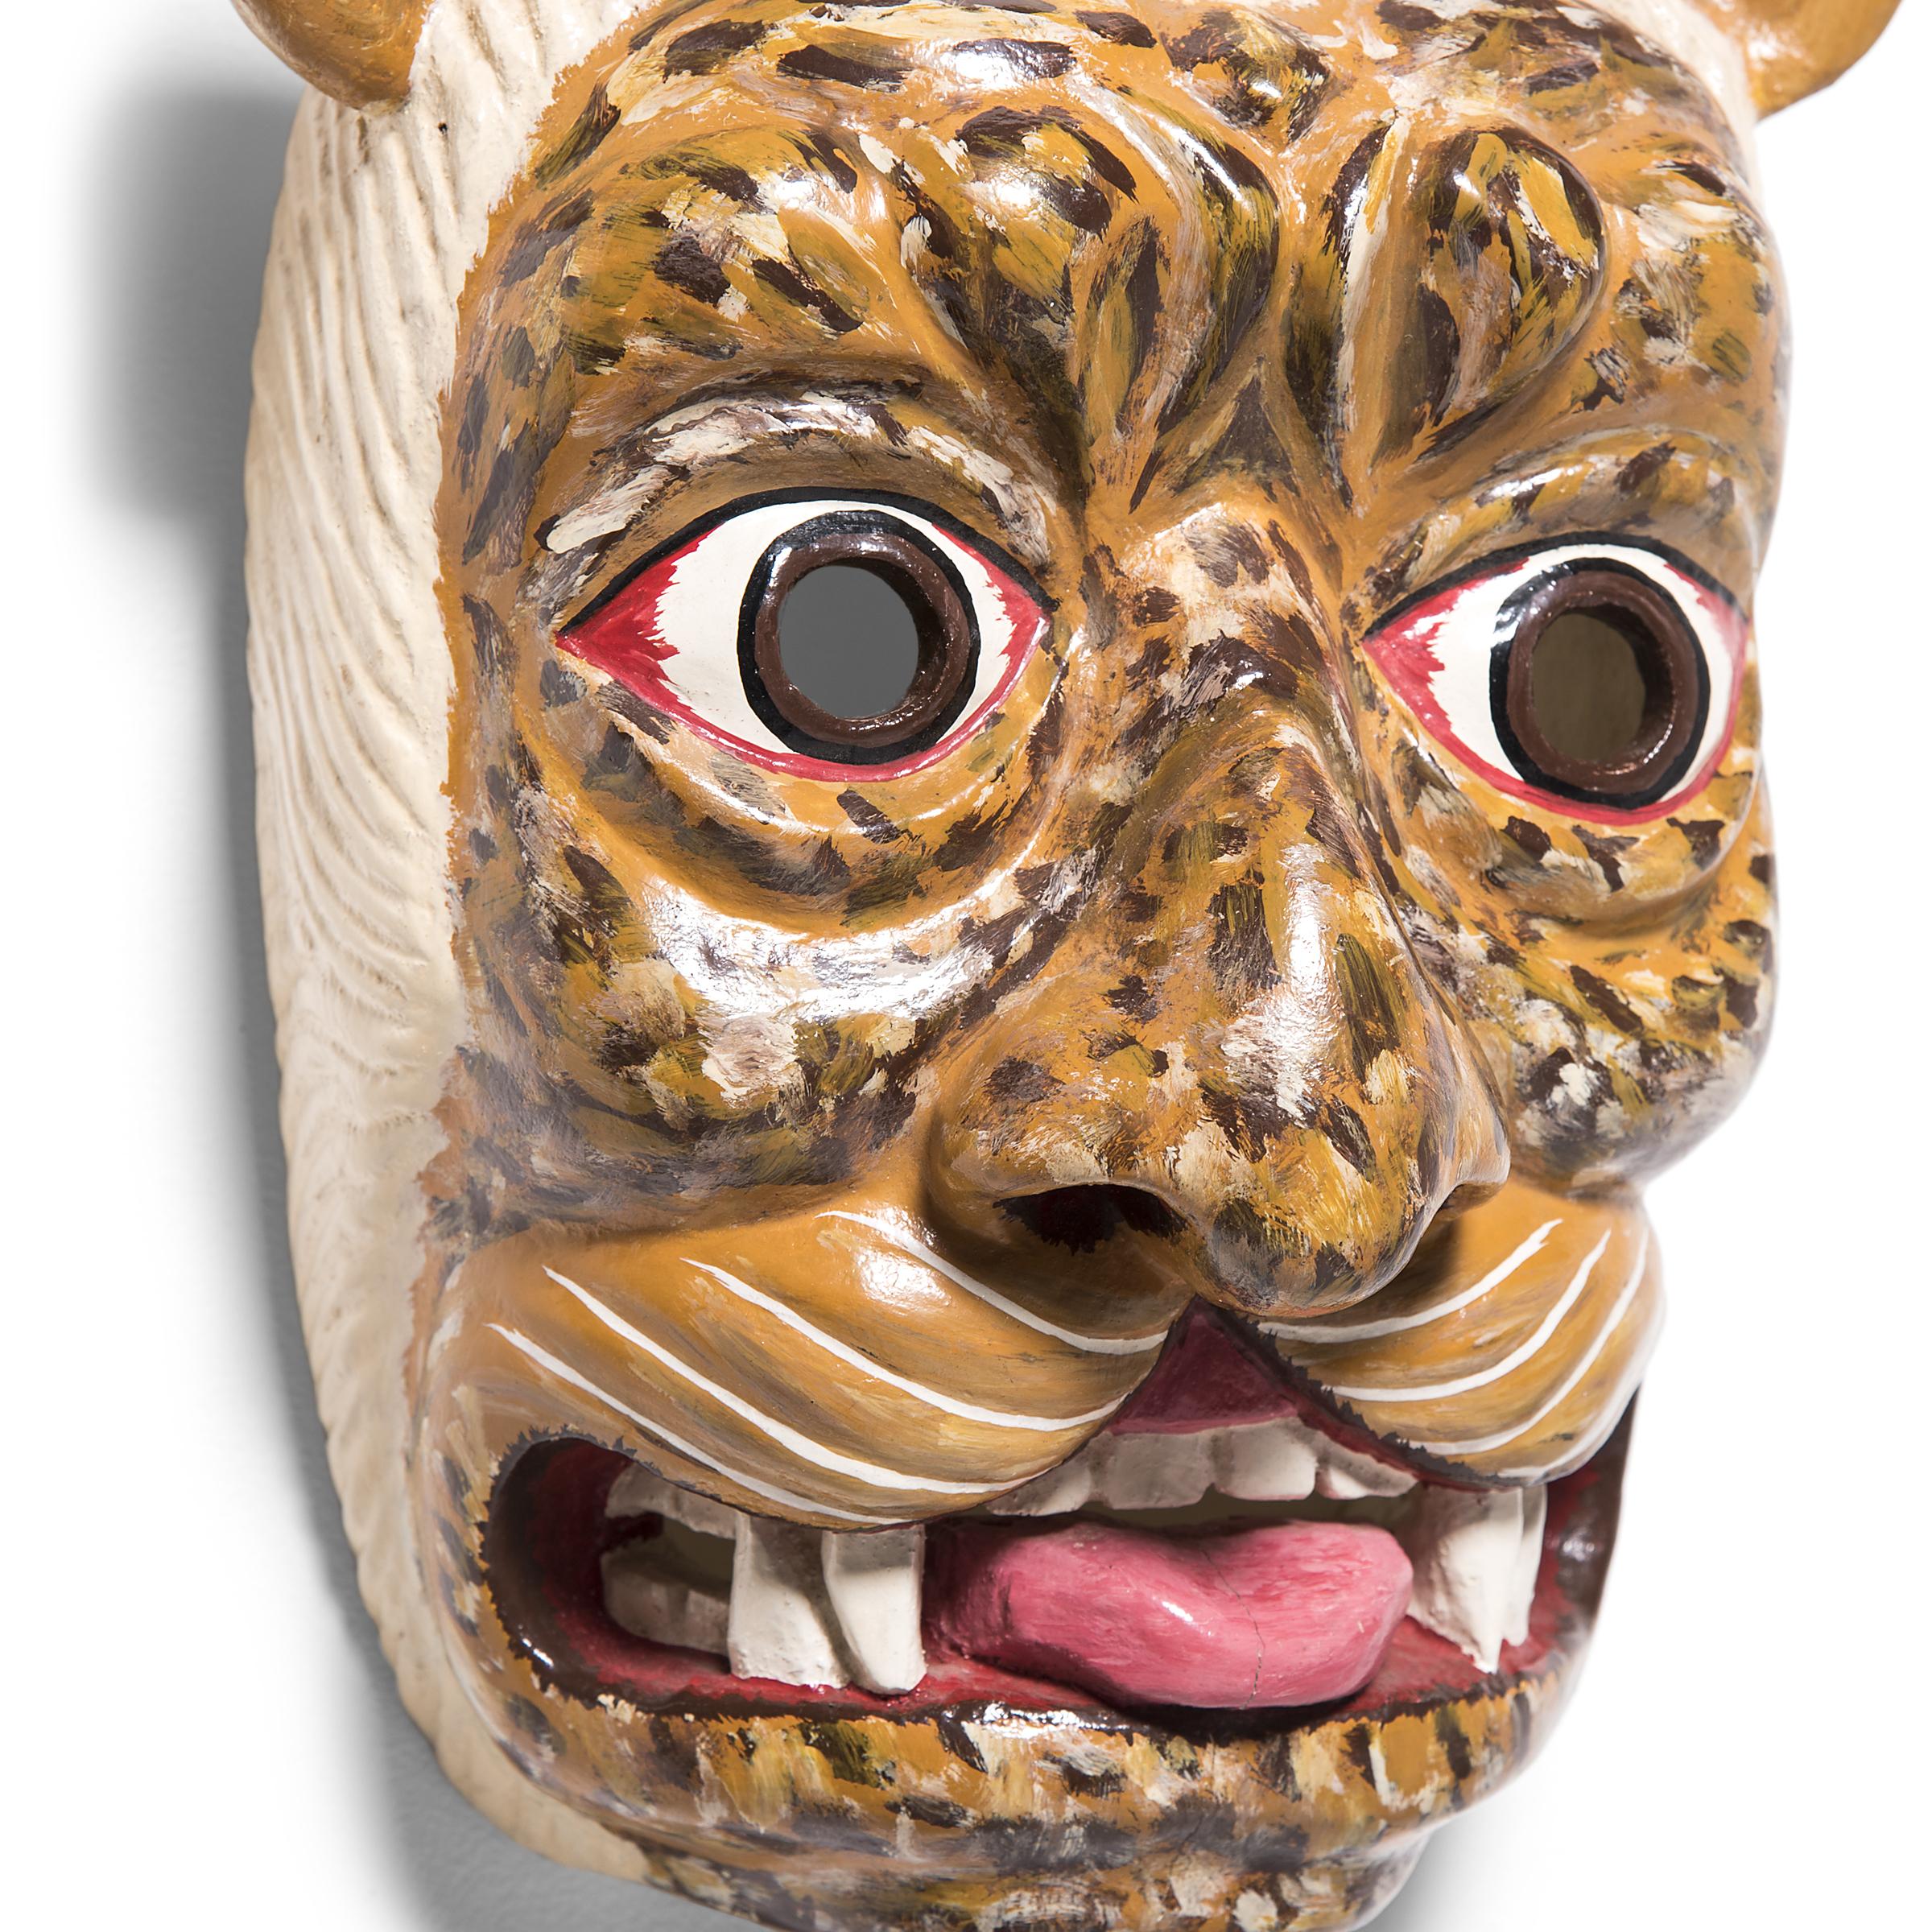 The Jaguar Mask is an essential component of traditional Mexican dance and ritual, symbolizing power and ferocity. This particular mask hails from the state of Guerrero, Mexico known for its rich cultural heritage and striking artistry. Guerrero has